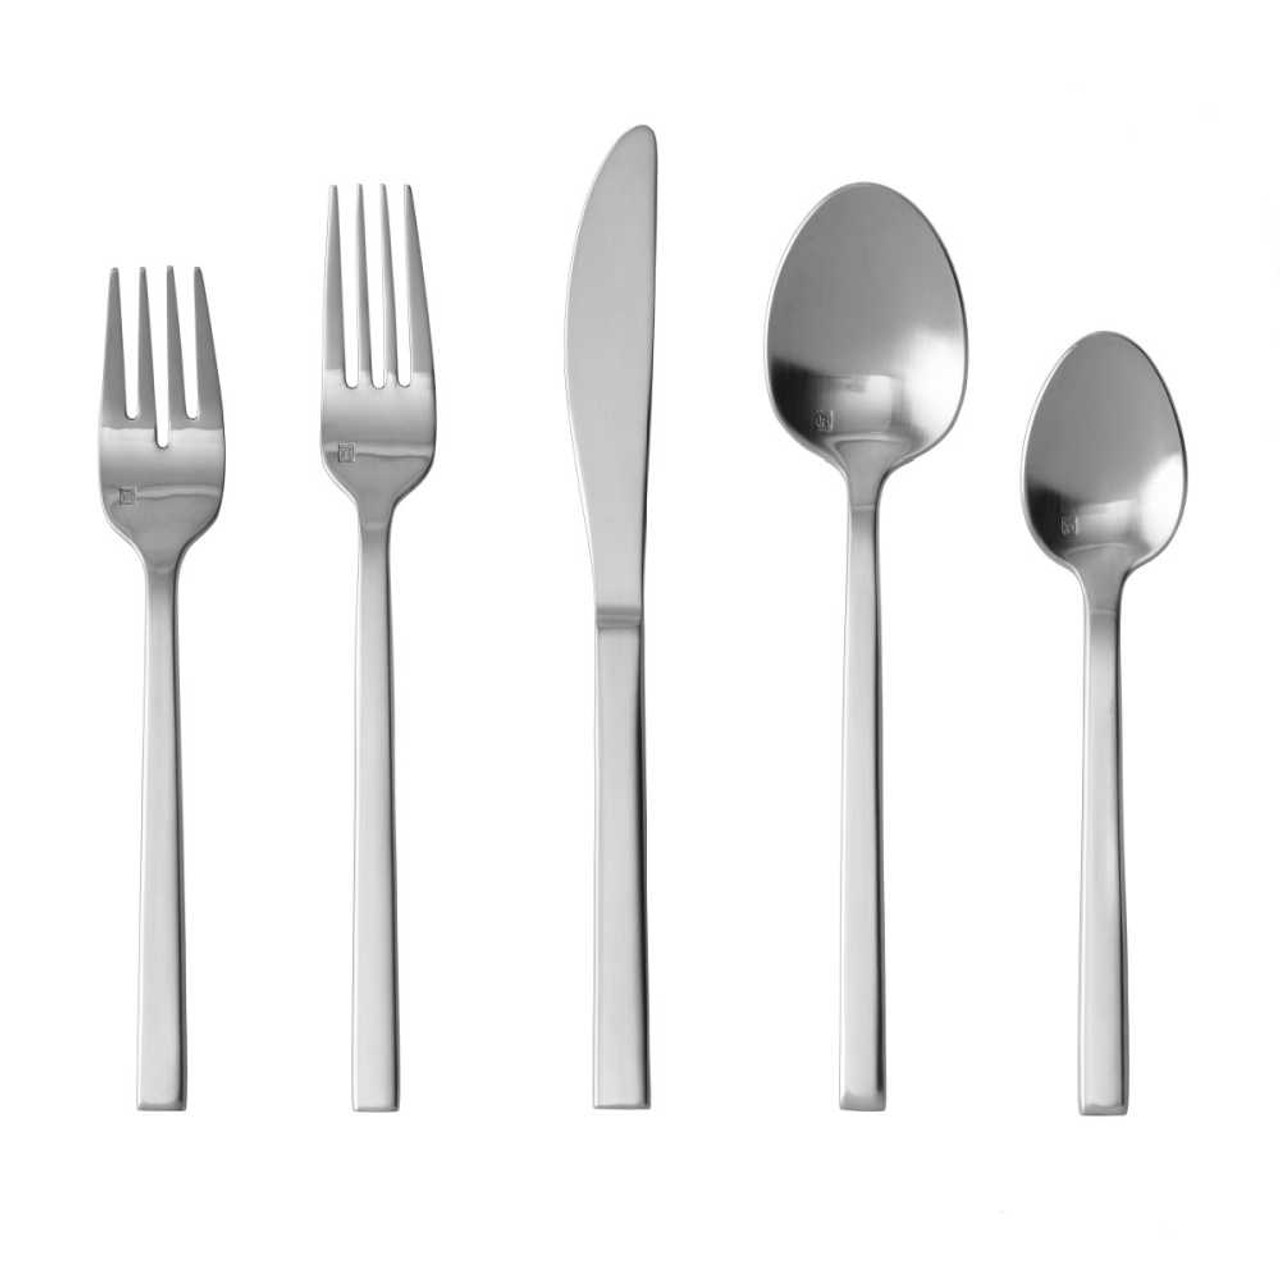 https://cdn11.bigcommerce.com/s-hccytny0od/images/stencil/1280x1280/products/5441/23719/Fortessa_Arezzo_Brushed_Stainless_20-Piece_Flatware_Set__08438.1684642364.jpg?c=2?imbypass=on